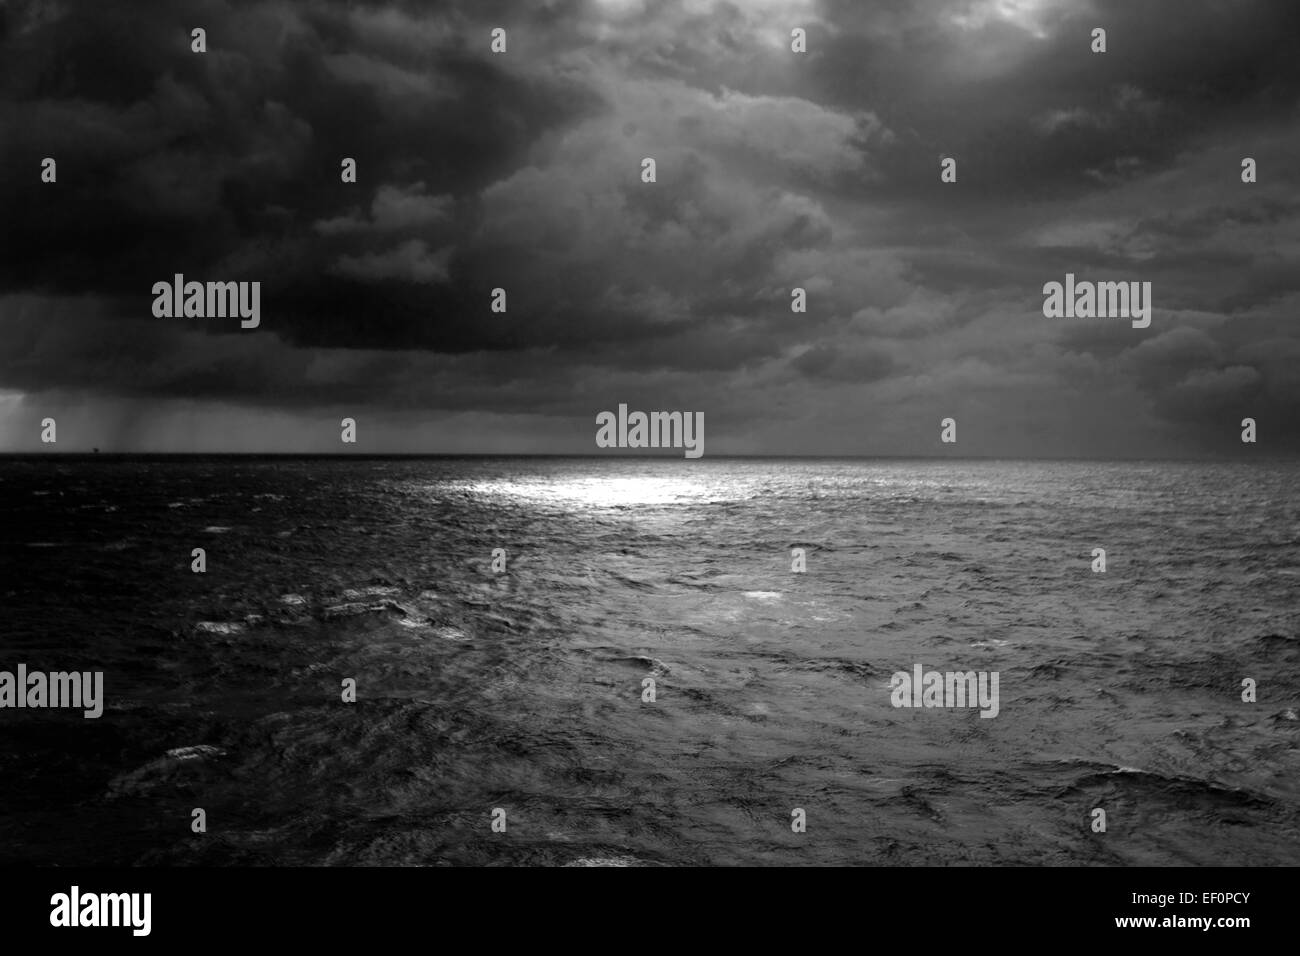 View of Stormy seas and dramatic clouds in the Atlantic Ocean. Stock Photo